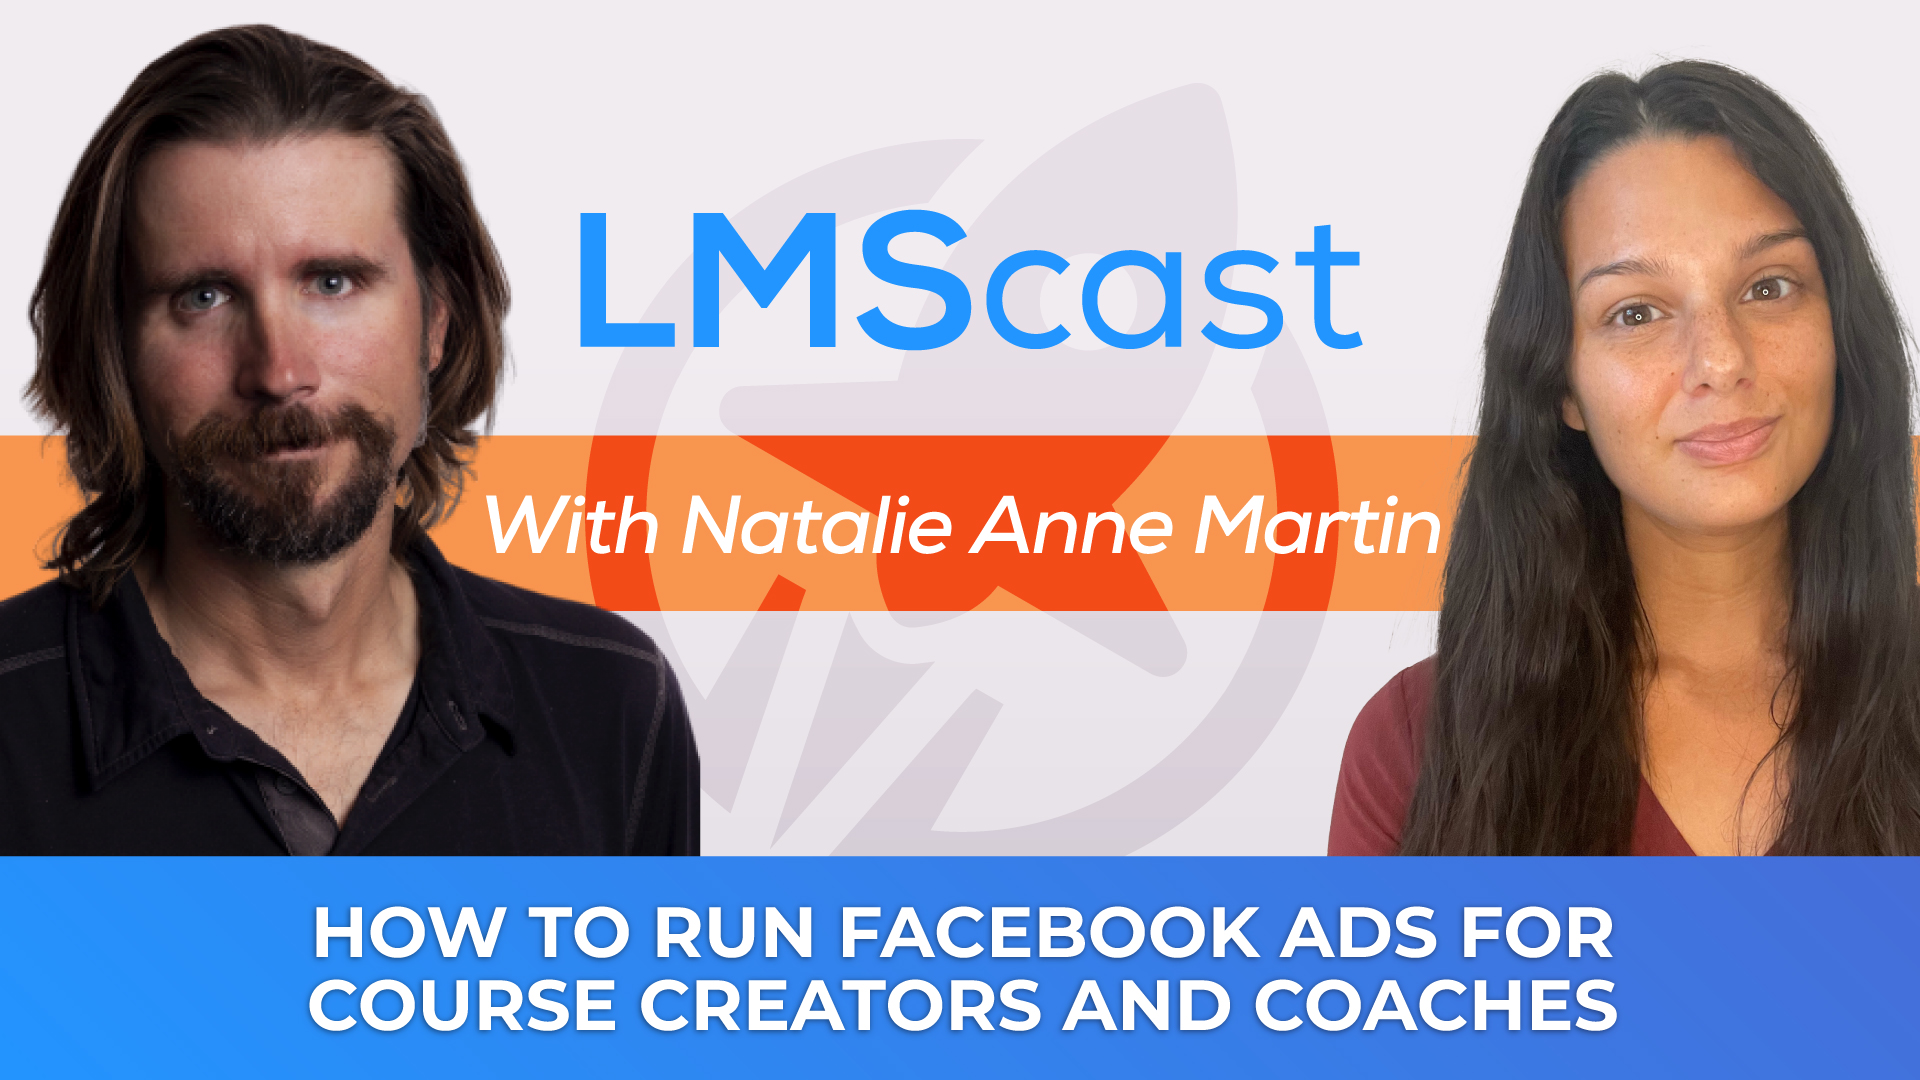 How to Run Facebook Ads for Course Creators and Coaches with Natalie Anne Martin